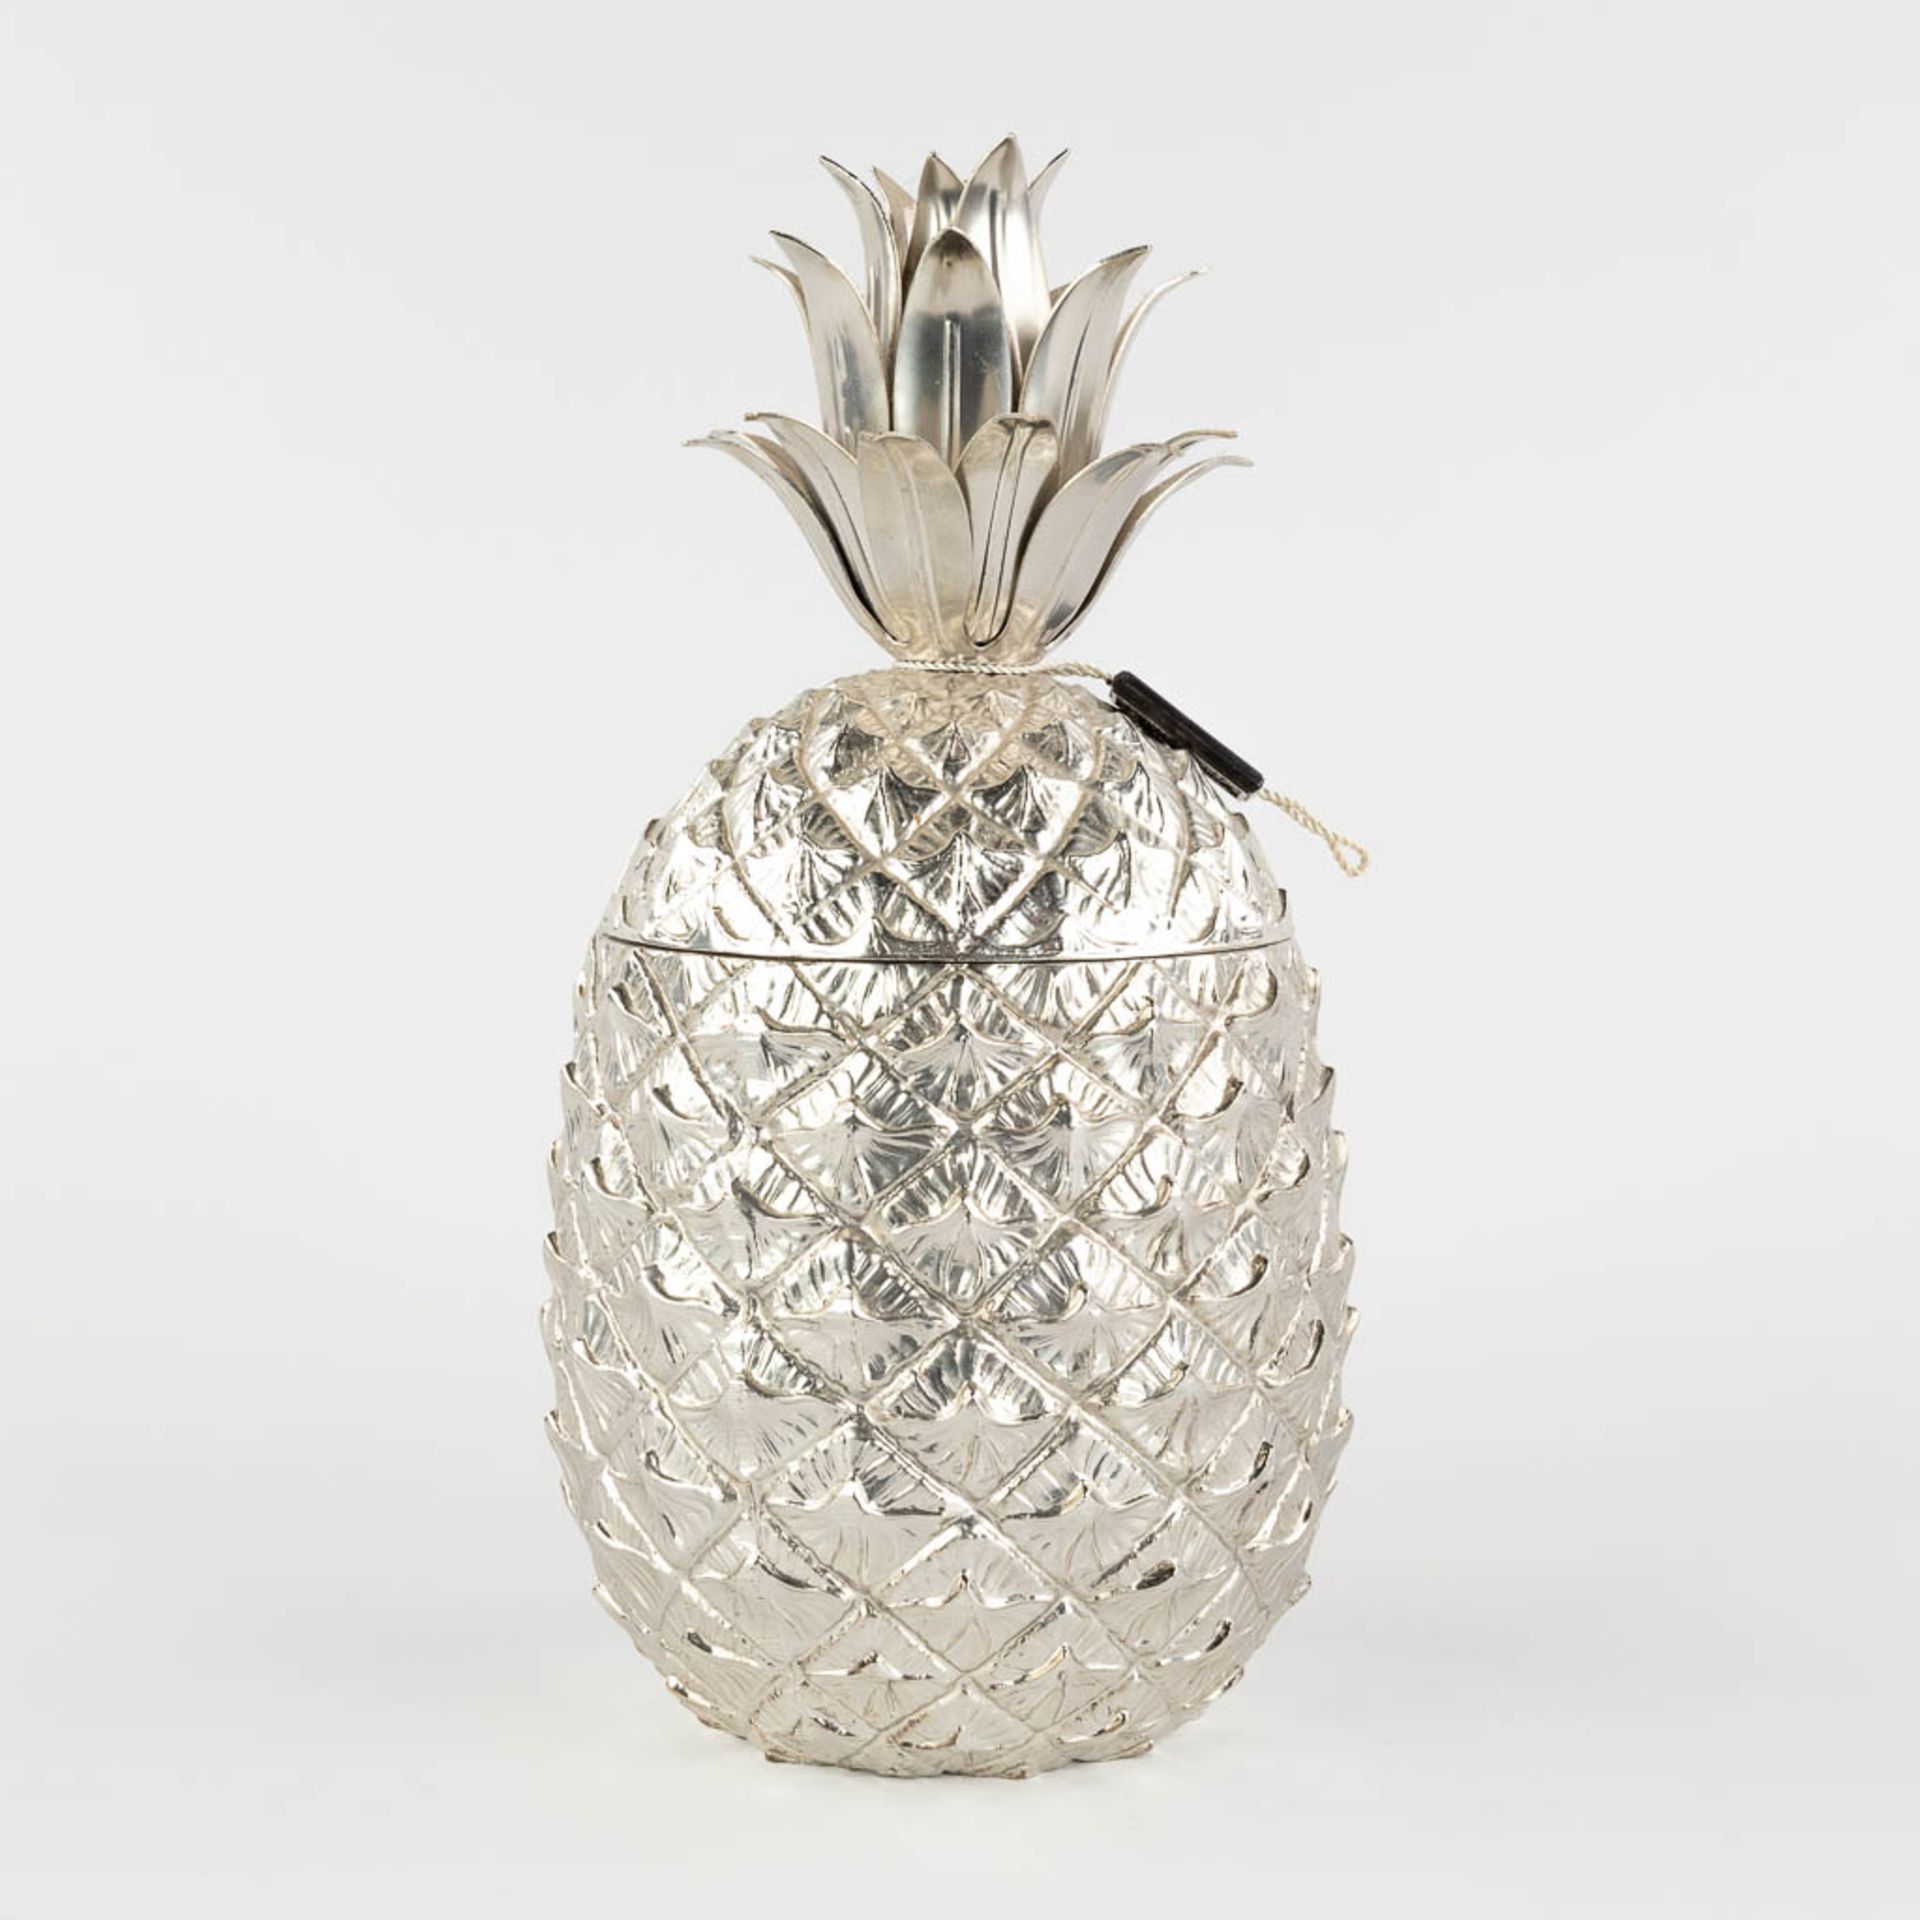 Mauro MANETTI (XX) 'Pineapple' an ice pail. (H:26 x D:14 cm) - Image 4 of 13